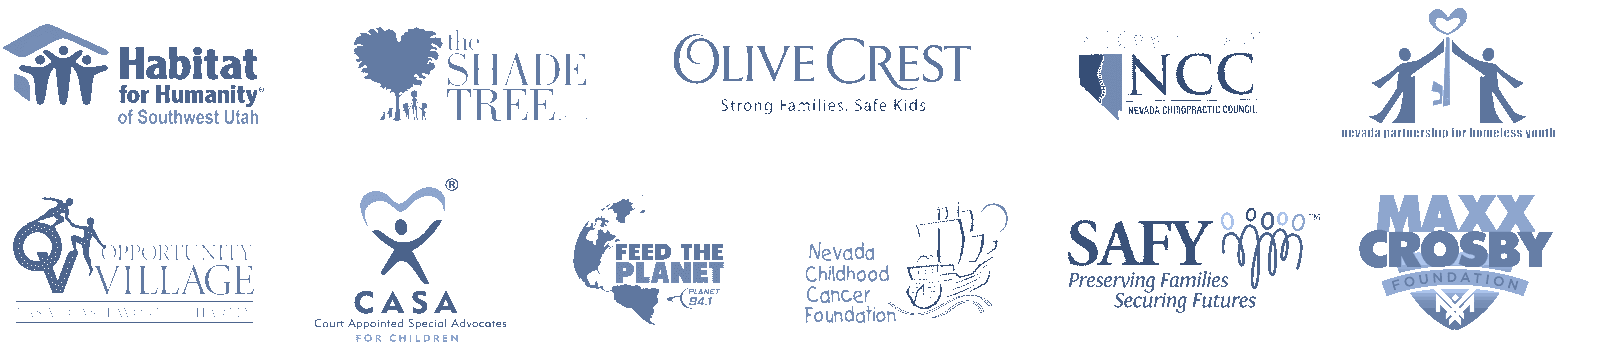 Habitat for Hummanity, The Shade Tree, Olive Crest, Nevada Chiropractic Council, Nevada Partnership for Homeless Youth, Opportunity Village, Court Appointment Special Advocates for Children, Feed the Planet, Nevada Childhood Cancer Foundation, SAFY, Maxx Crosby